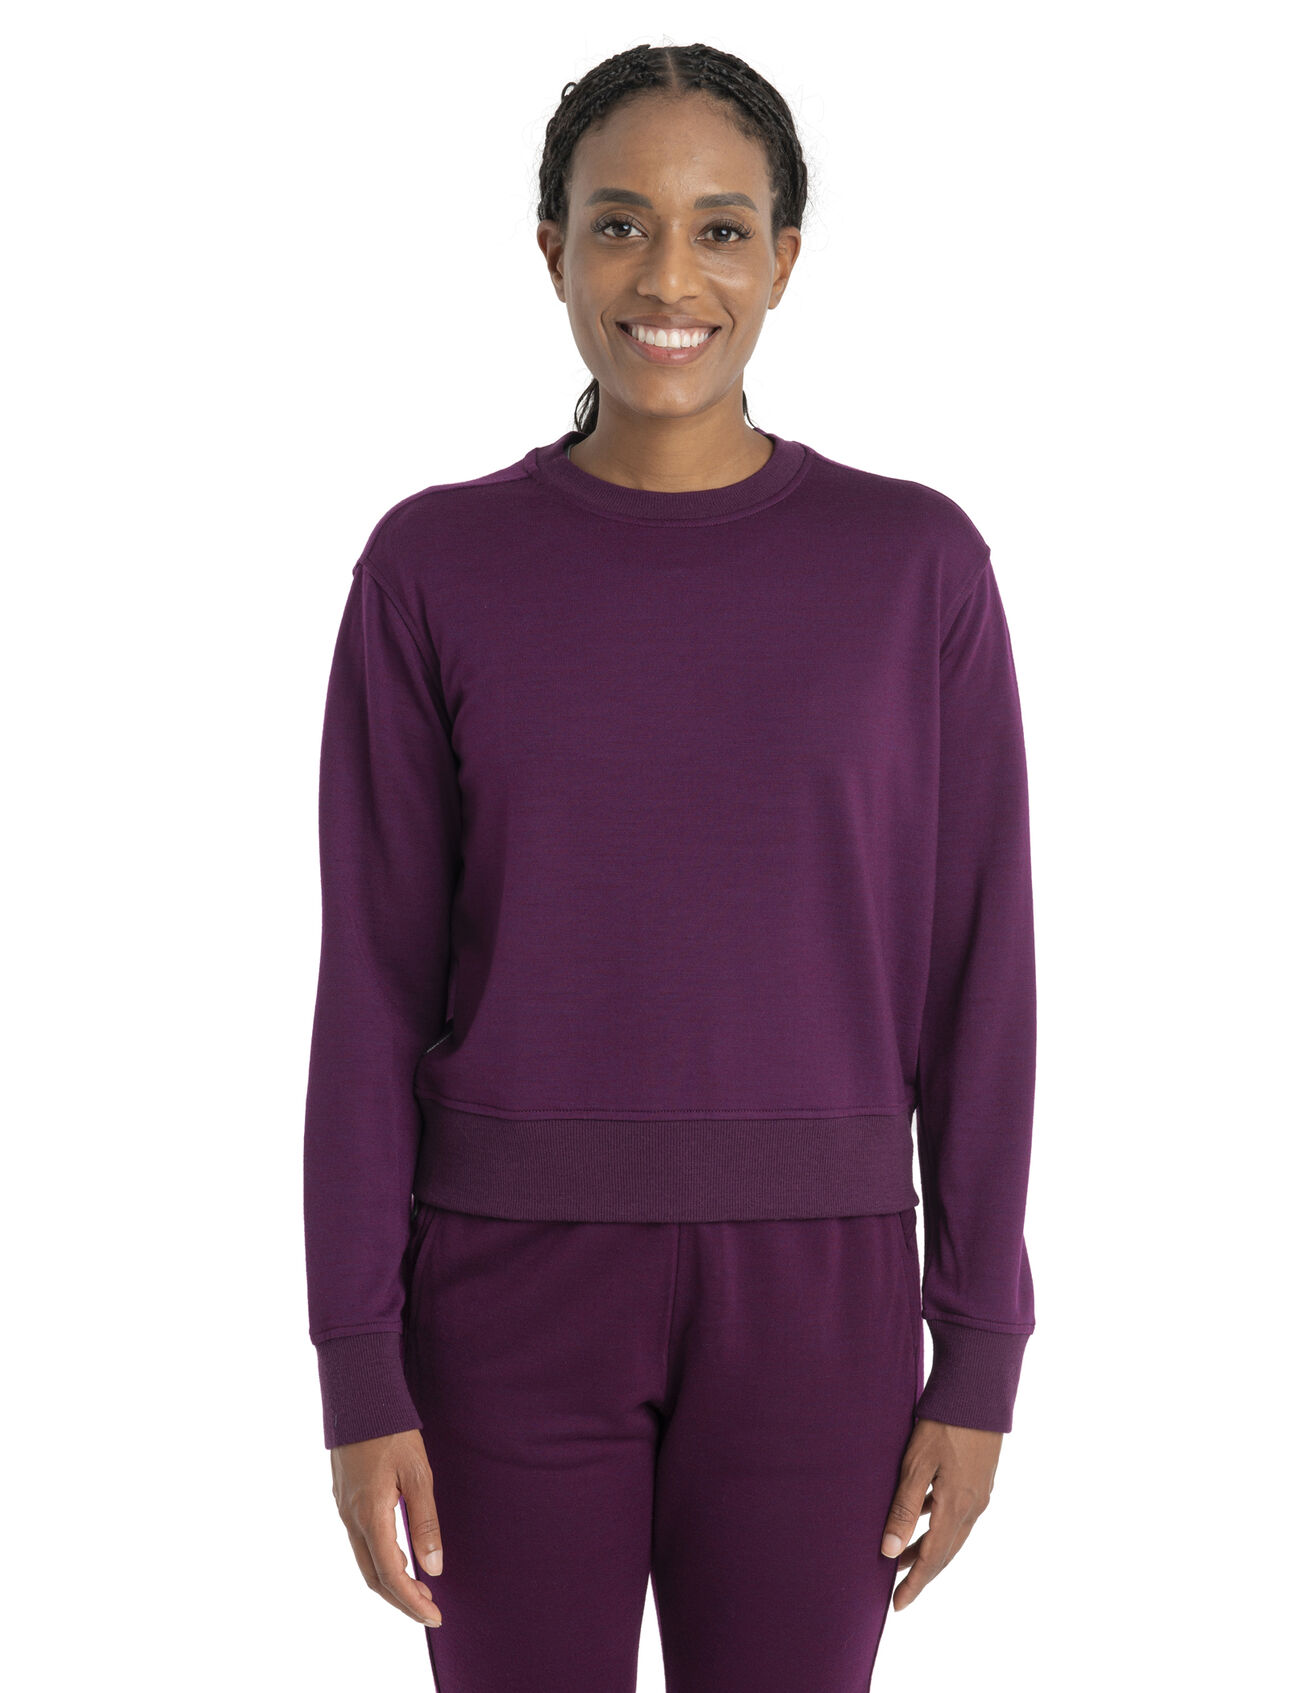 Womens Merino Blend Crush II Long Sleeve Sweatshirt The ultimate in down-time comfort, the Crush II Long Sleeve Sweatshirt is a clean and classic pullover made with our Eucaform fabric—a blend of natural merino wool and plant-based TENCEL™ Lyocell terry.